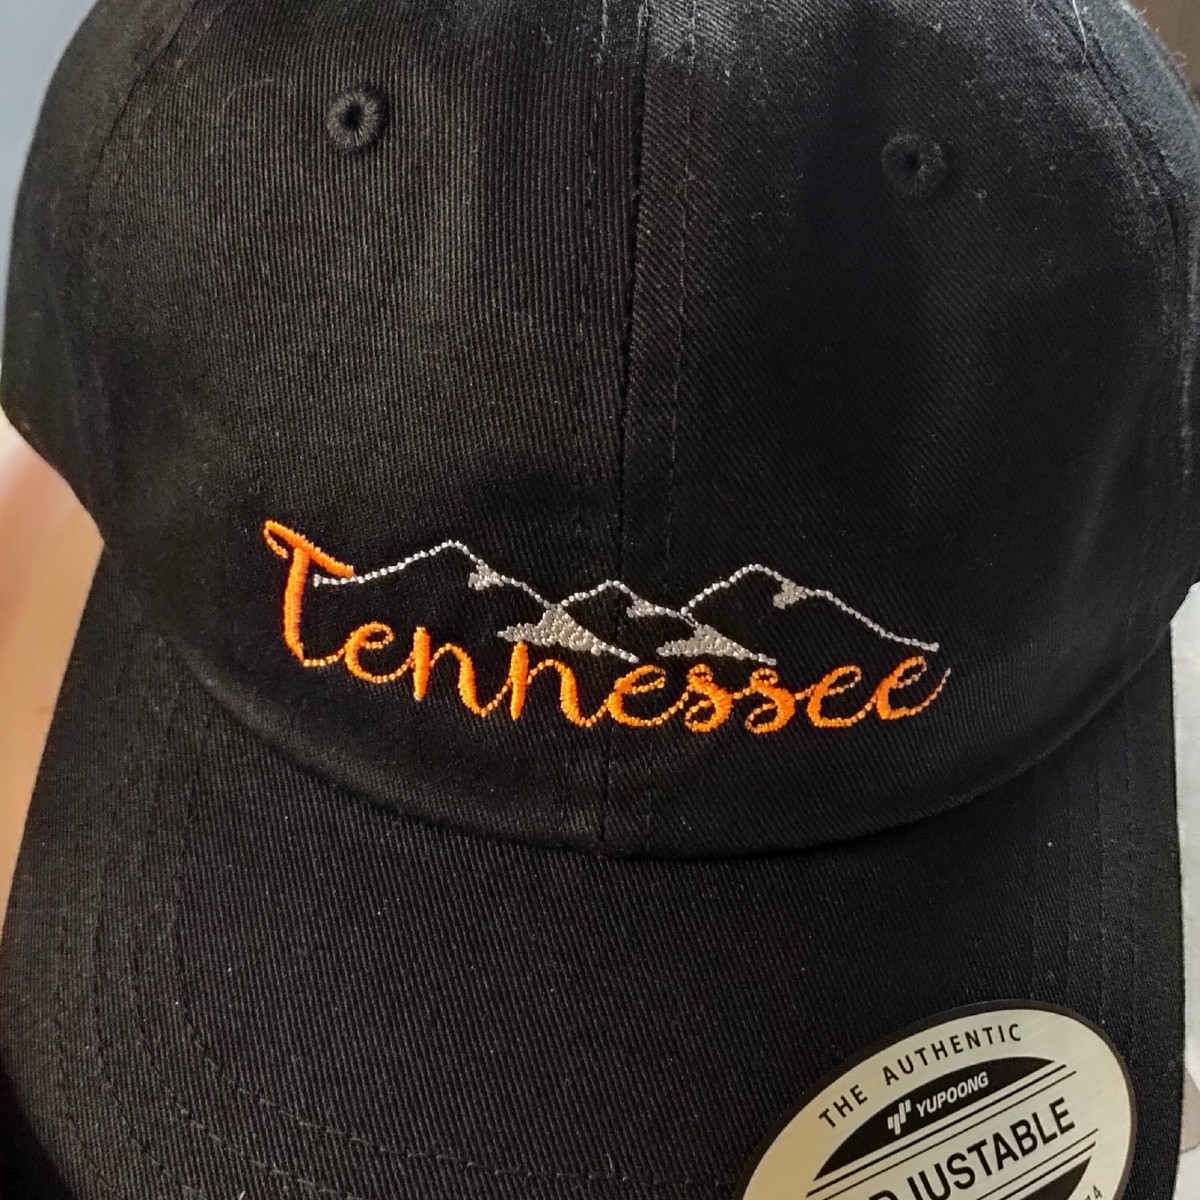 Tennessee Mountain Hat